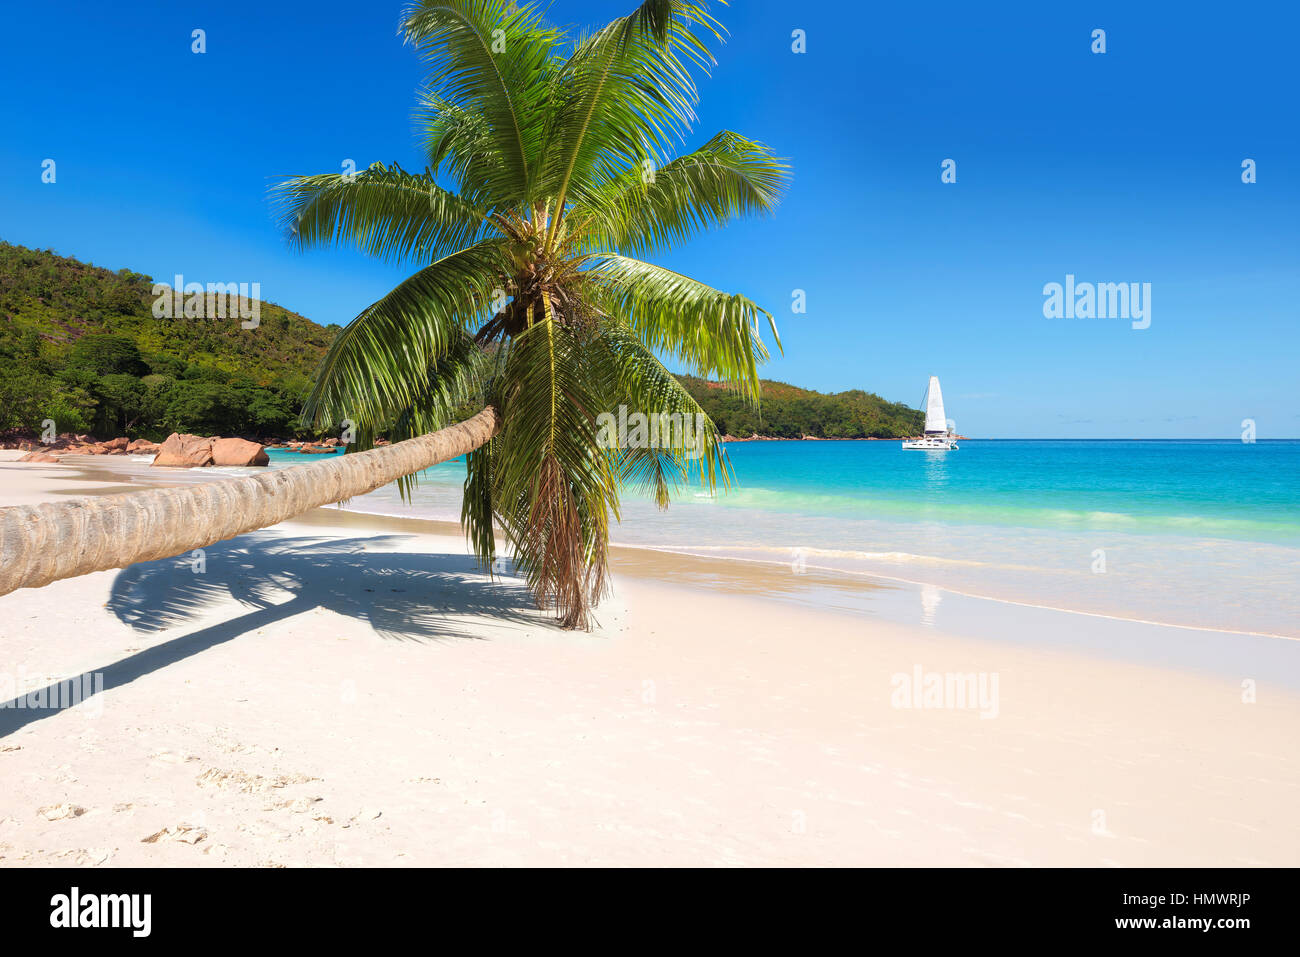 Palm tree on tropical beach. Banque D'Images